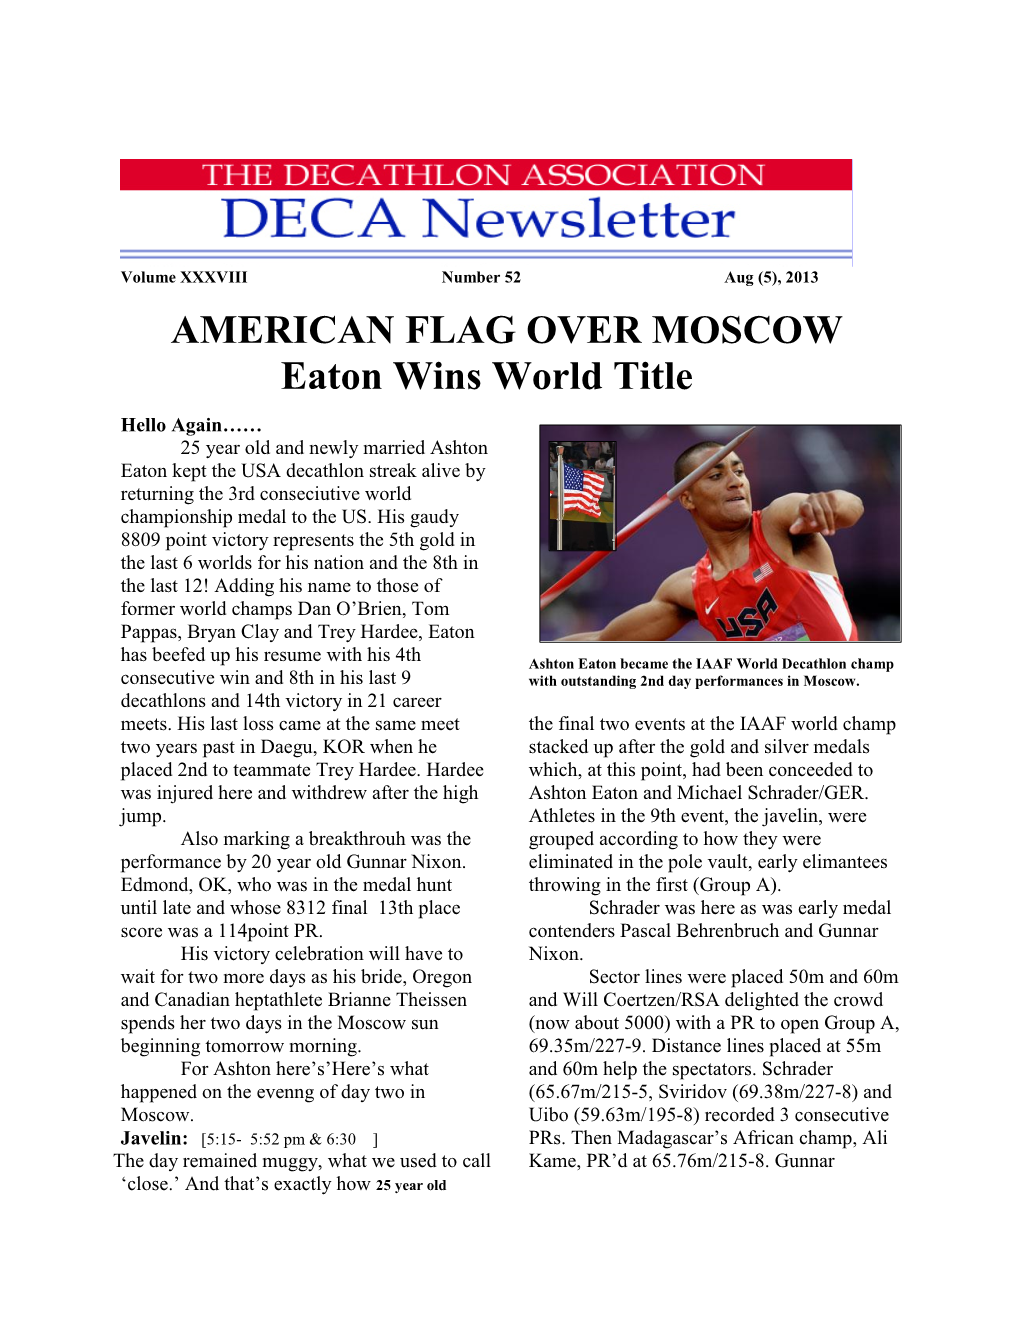 AMERICAN FLAG OVER MOSCOW Eaton Wins World Title